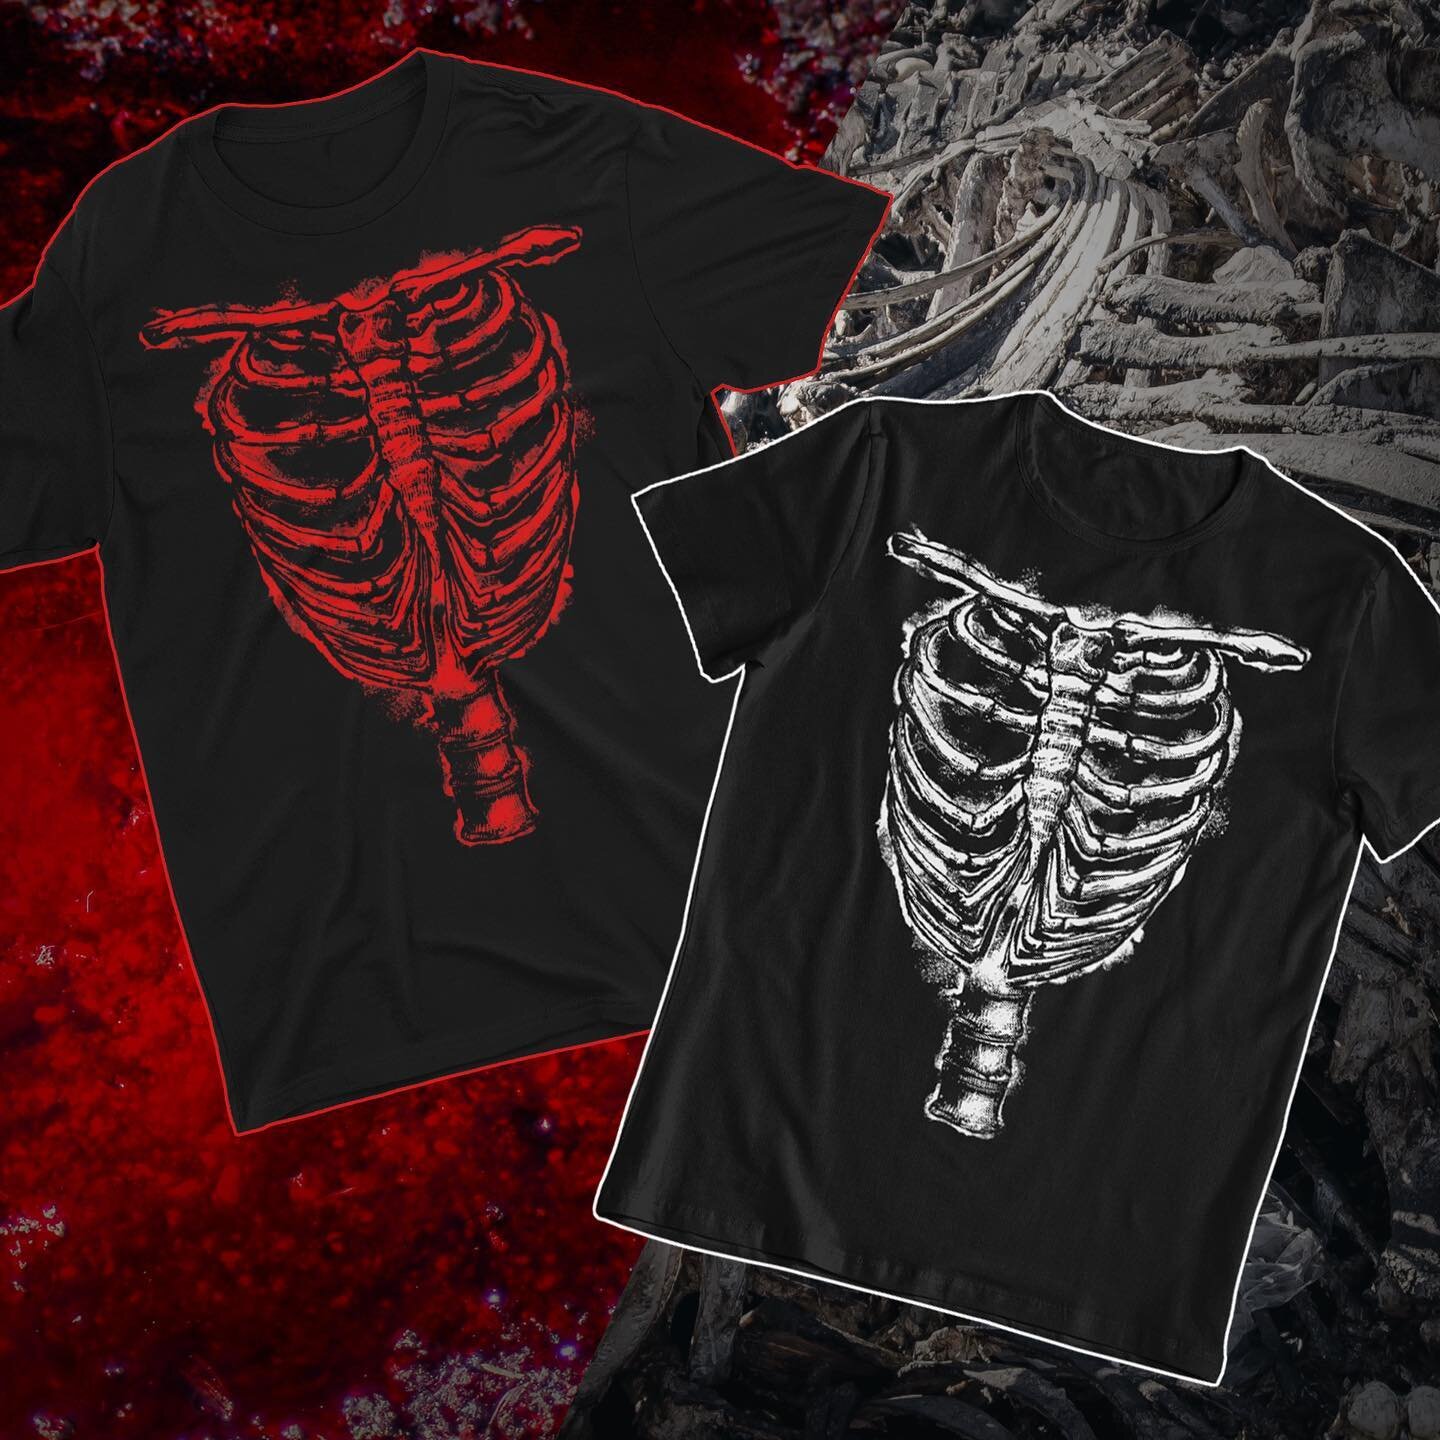 The Hauntwares grungy spin on the classic ribcage tee design, in white and red
.
.
.
.
.
#hauntwares #skeleton #punk #goth #emo #emofashion